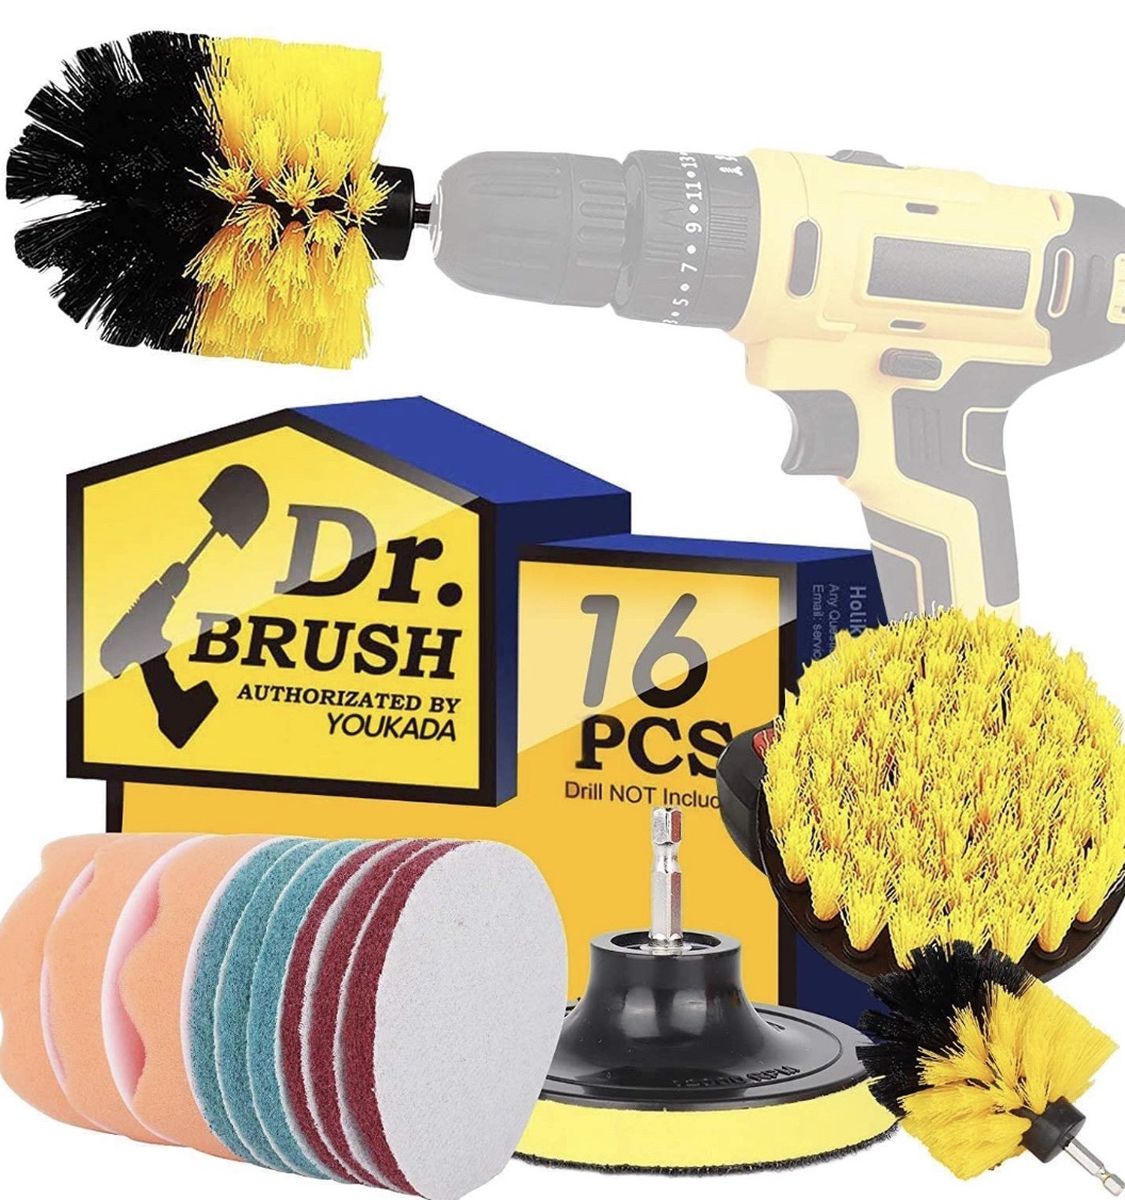 NEW! Drill Brush Power Scrubber Brush Cleaning Set 16PCS，Drill Scrub Brushes Kit with Long Attachment,Suitable for Bathroom surfaces, Tiles, Sinks, Ki